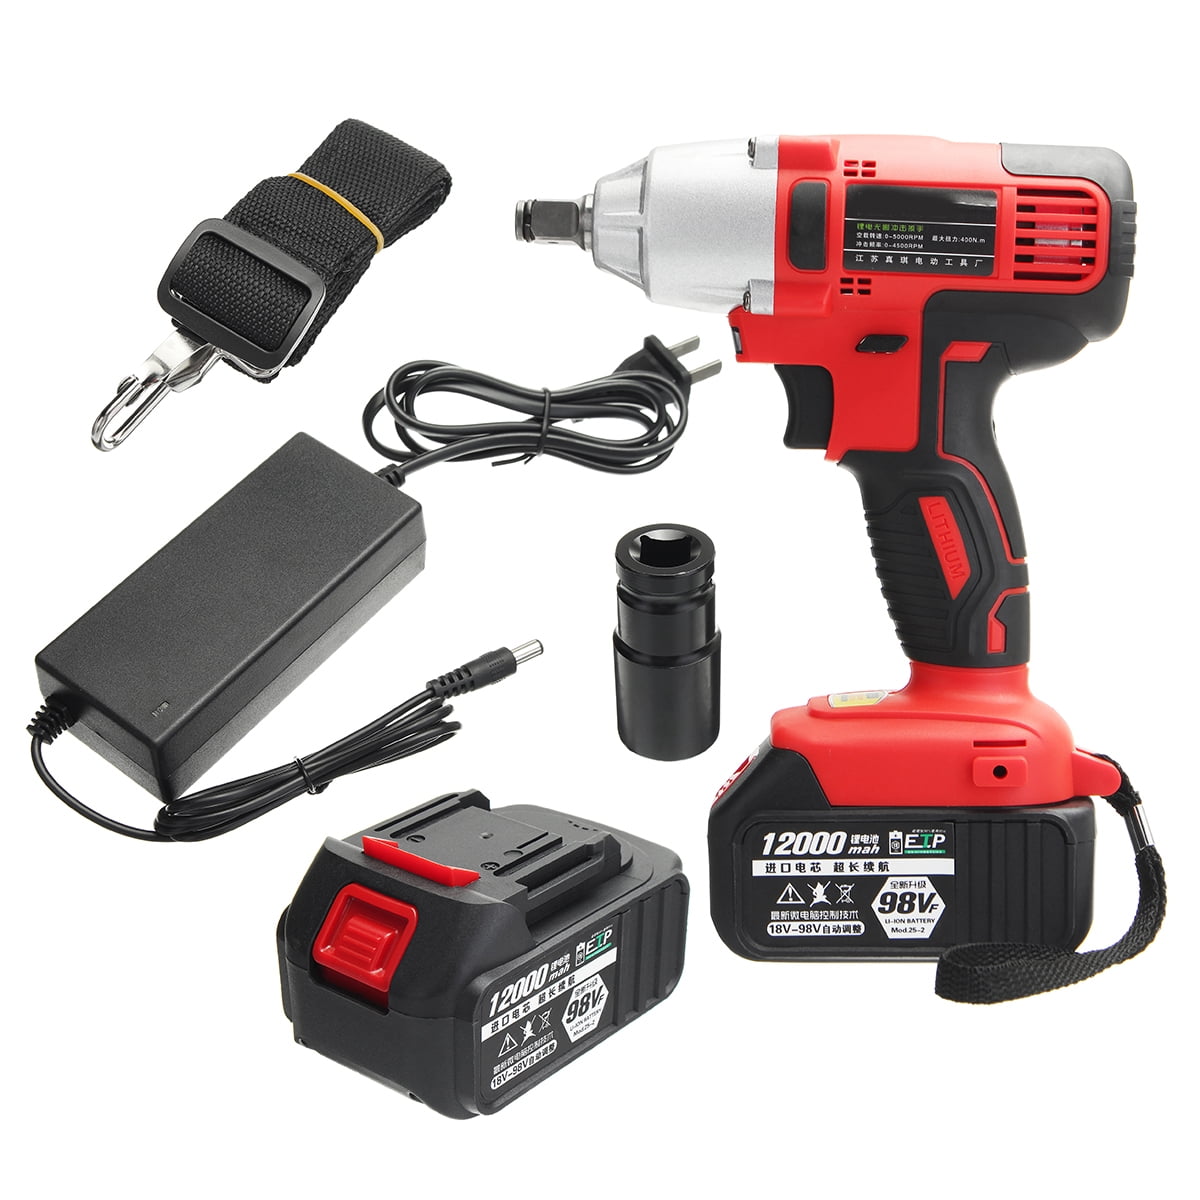 Cordless Impact Wrench Impact Wrench Cordless Screwdriver 18V 400 NM with Battery 